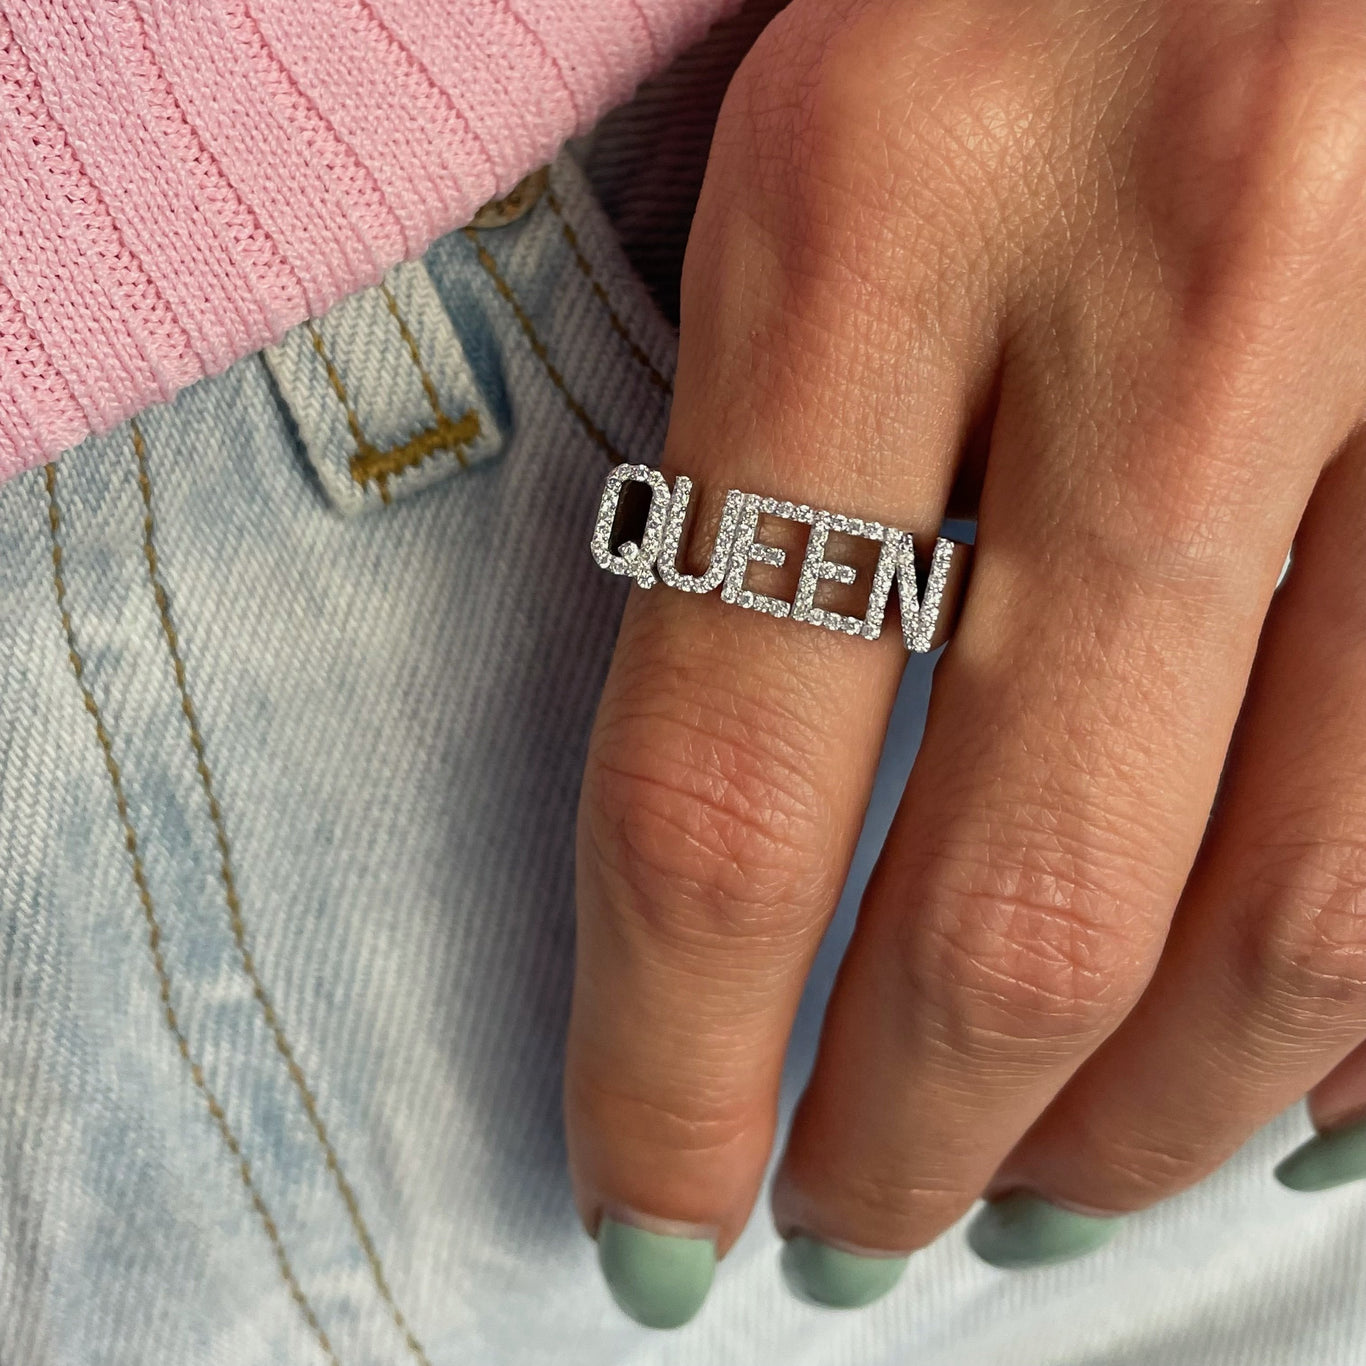 The Custom Name Ring with 4 and 6 Letters shown